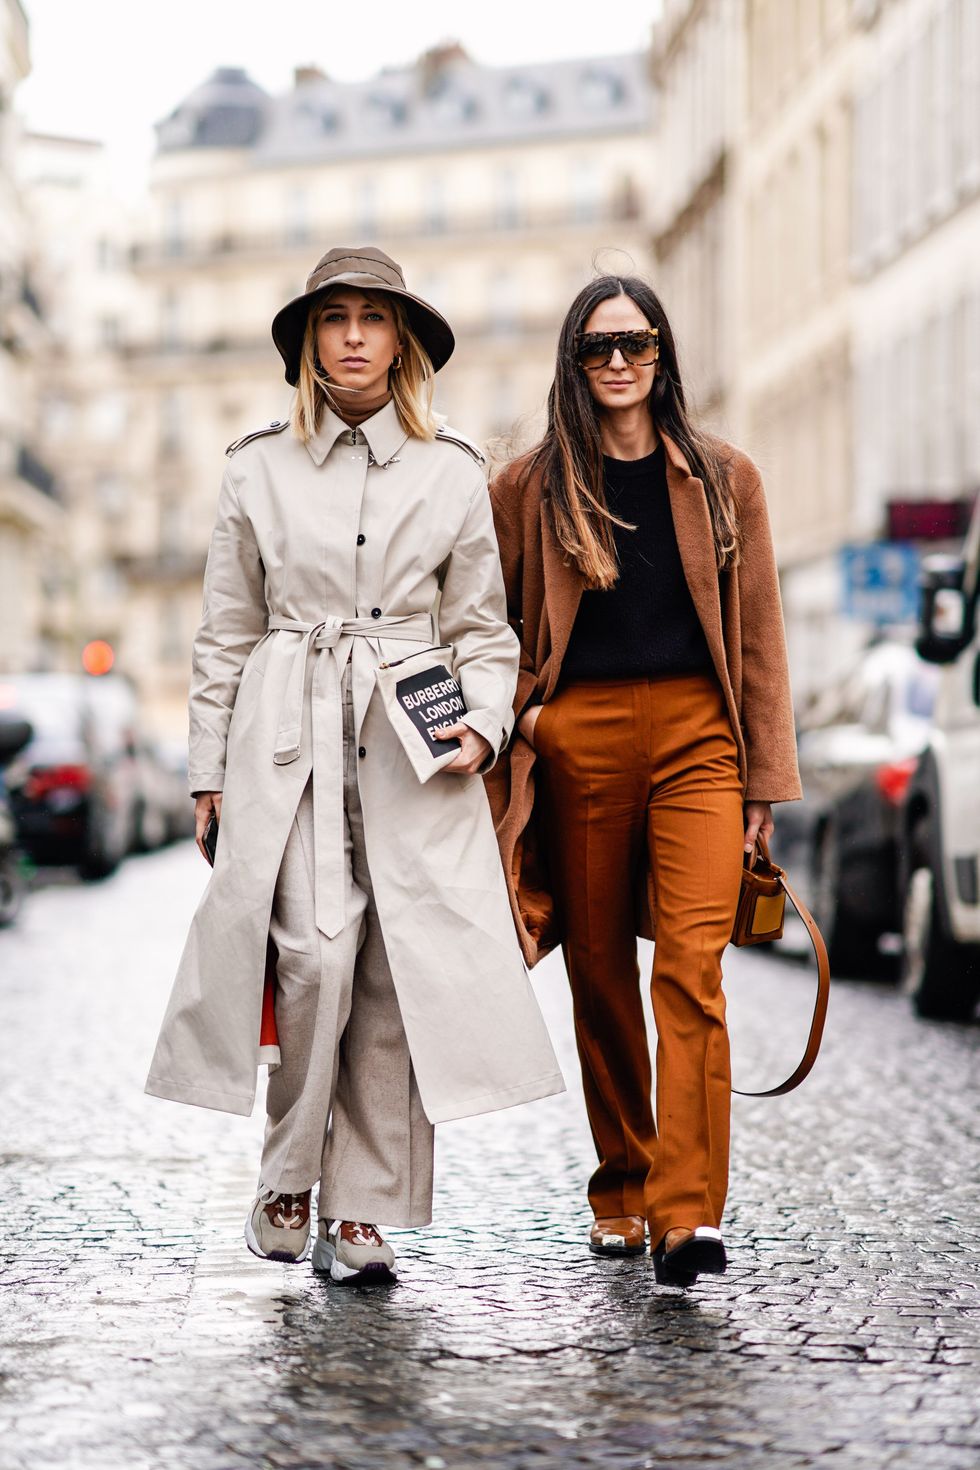 17 Looks That Prove Neutrals Are Better Than Pastels for Spring - Brit + Co